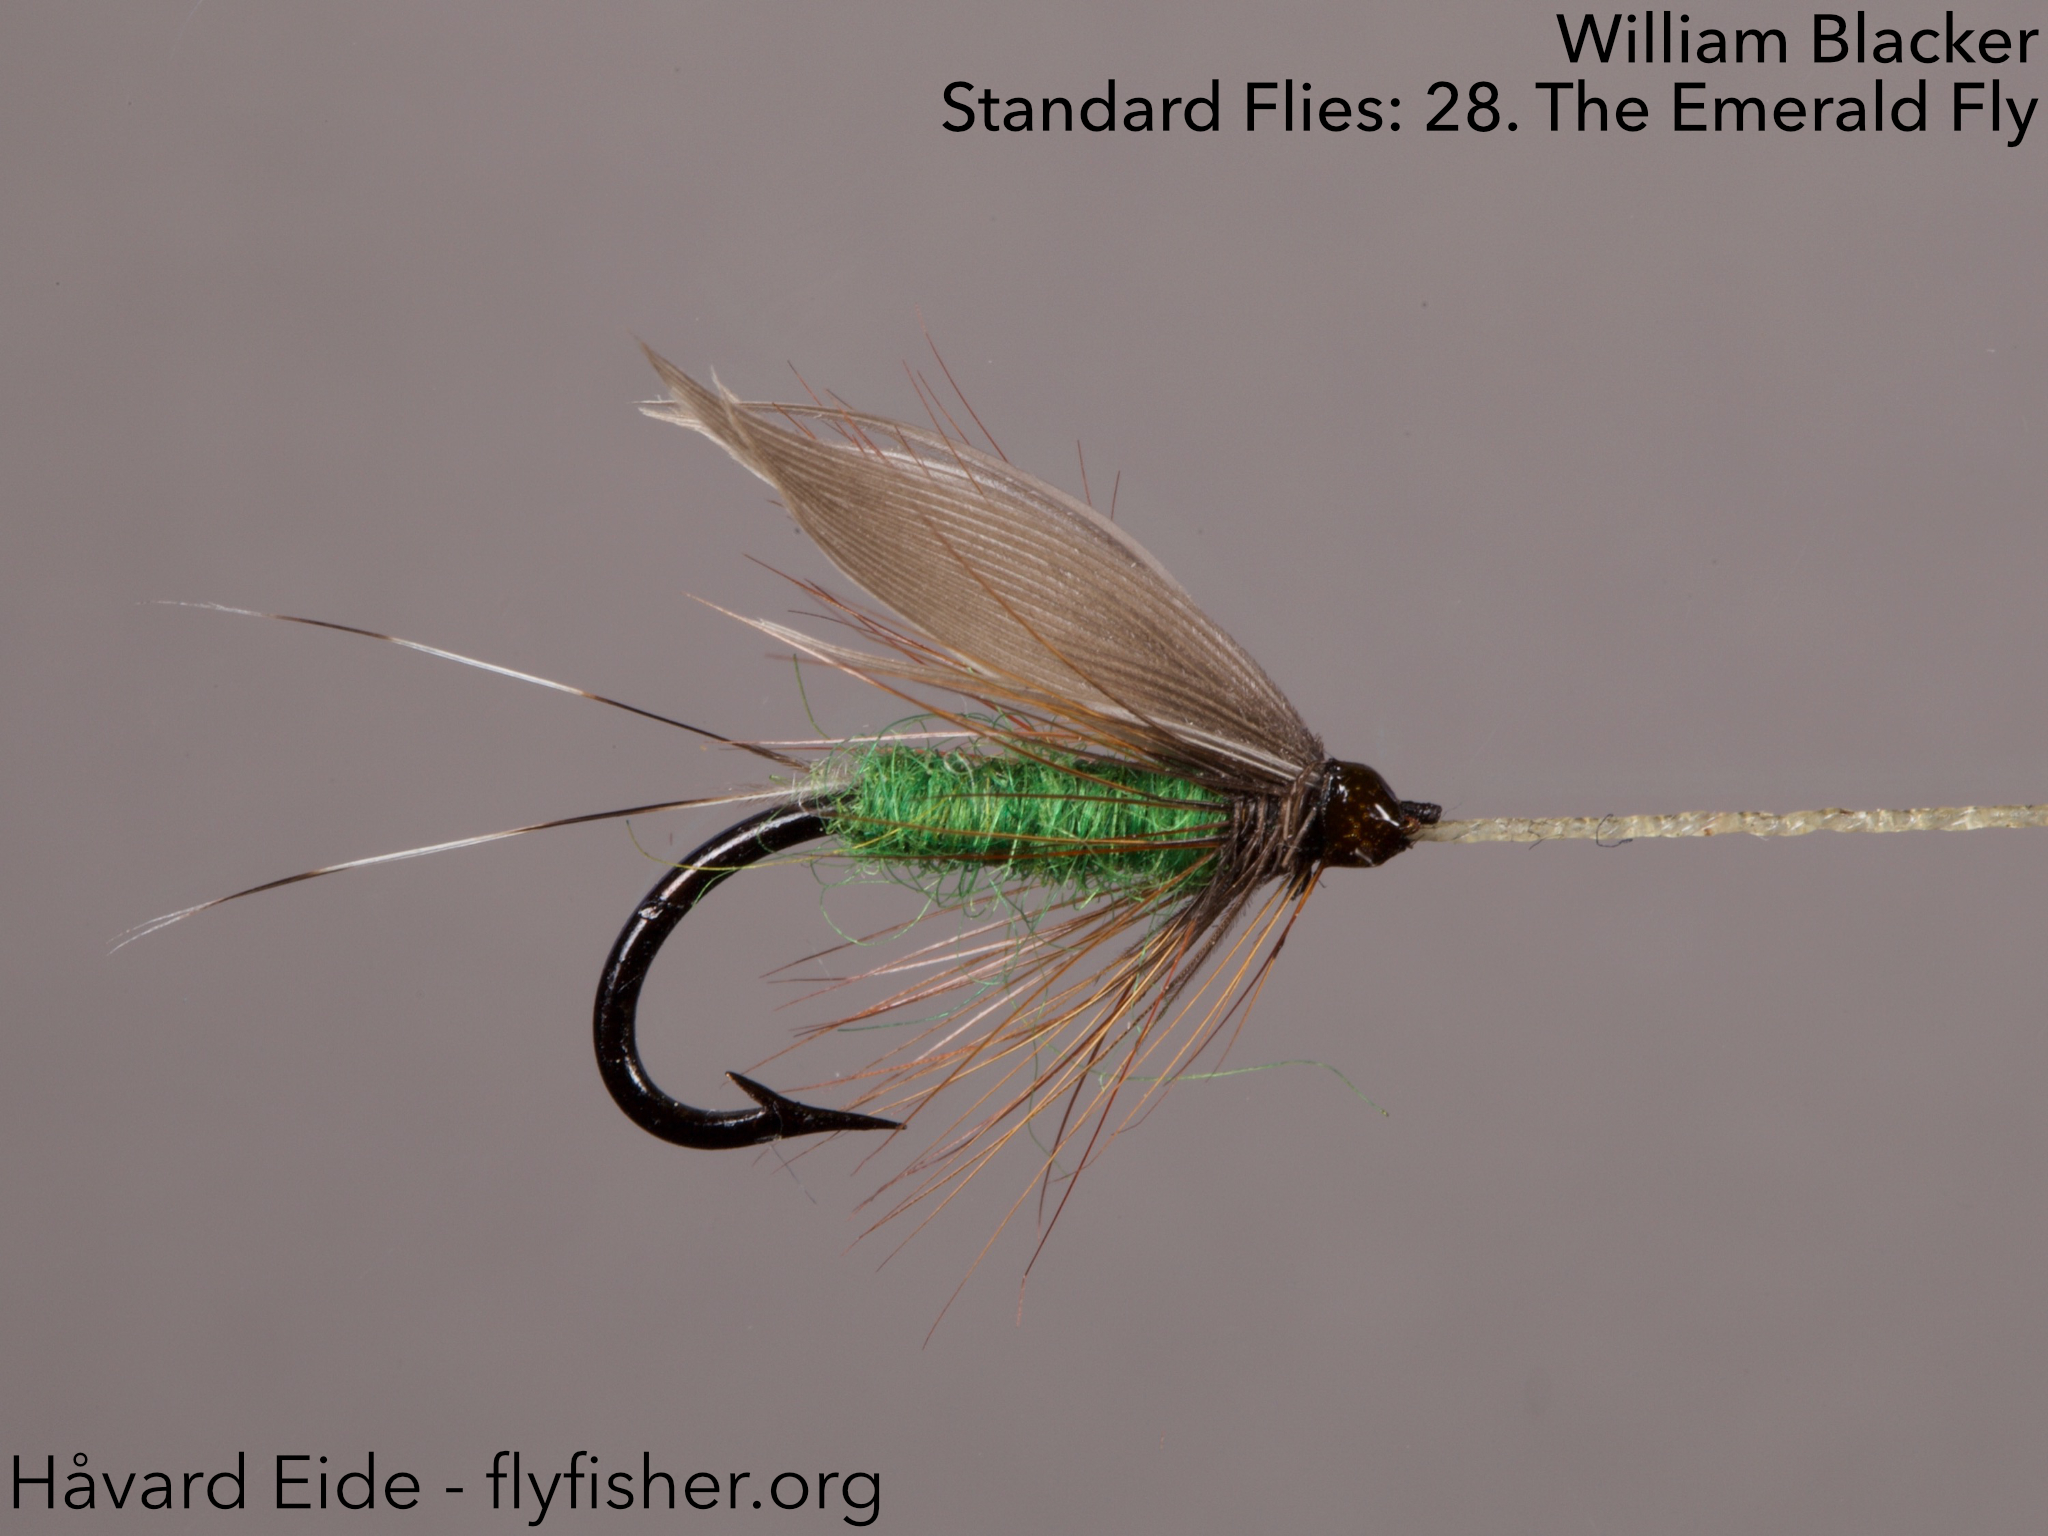 flyfisher.org | Flyfishing, flytying and hooks | Page 2